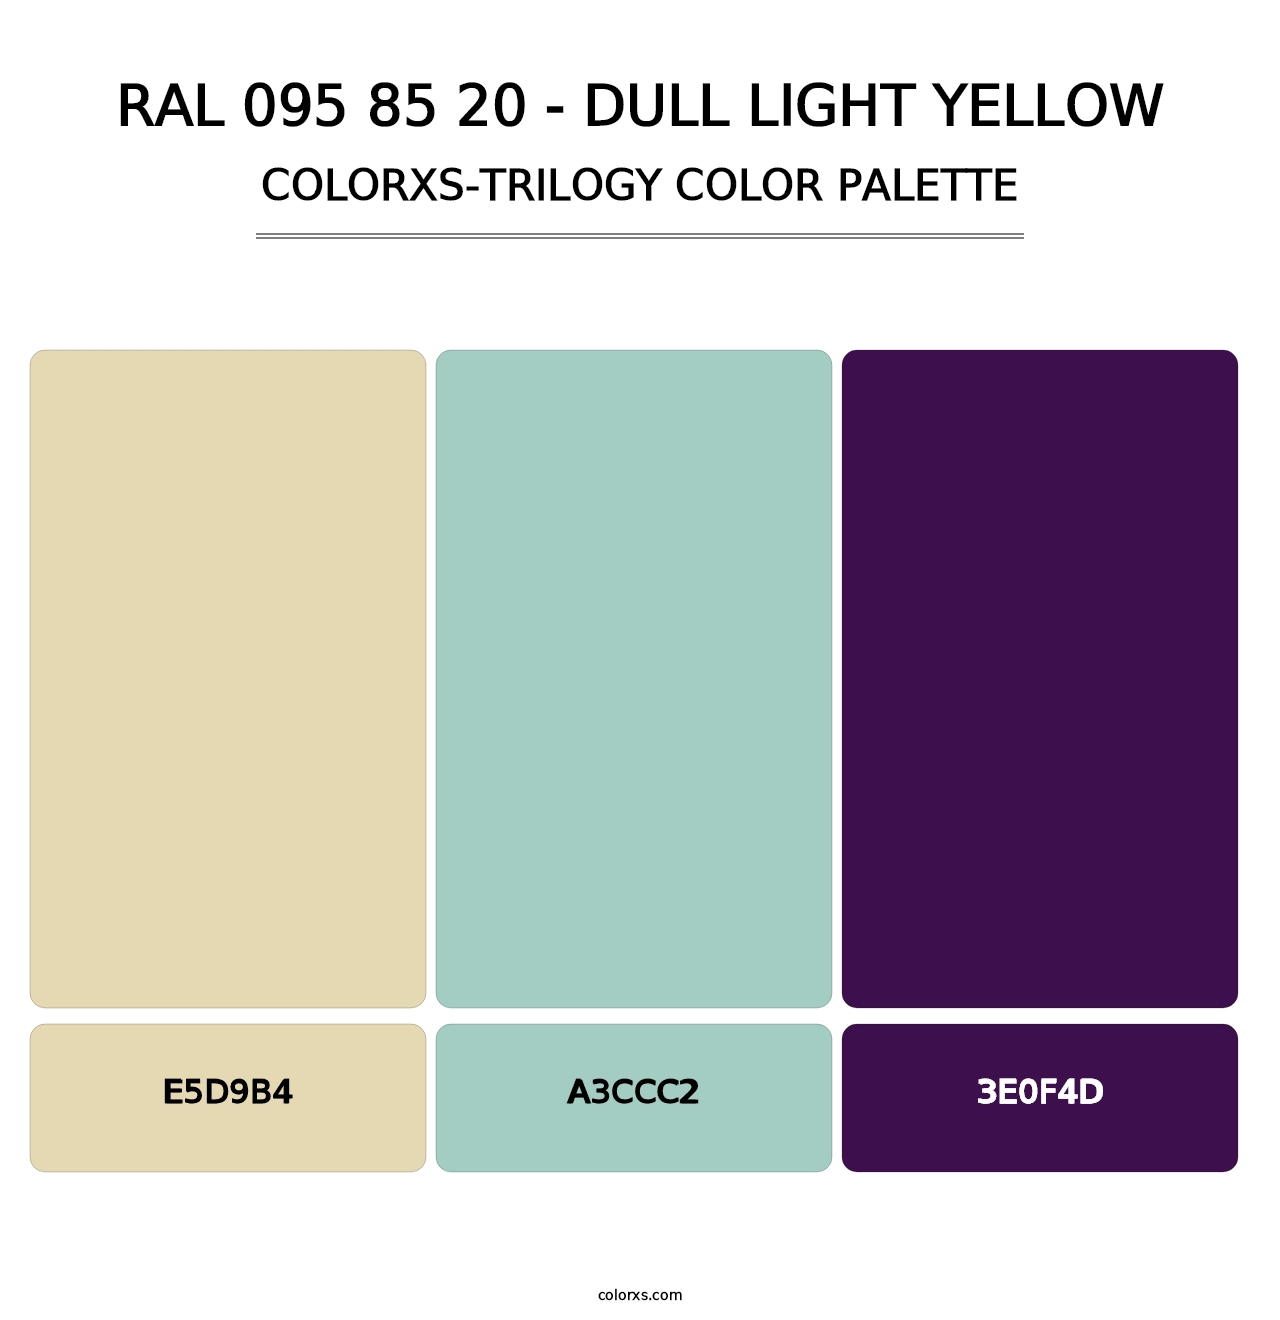 RAL 095 85 20 - Dull Light Yellow - Colorxs Trilogy Palette